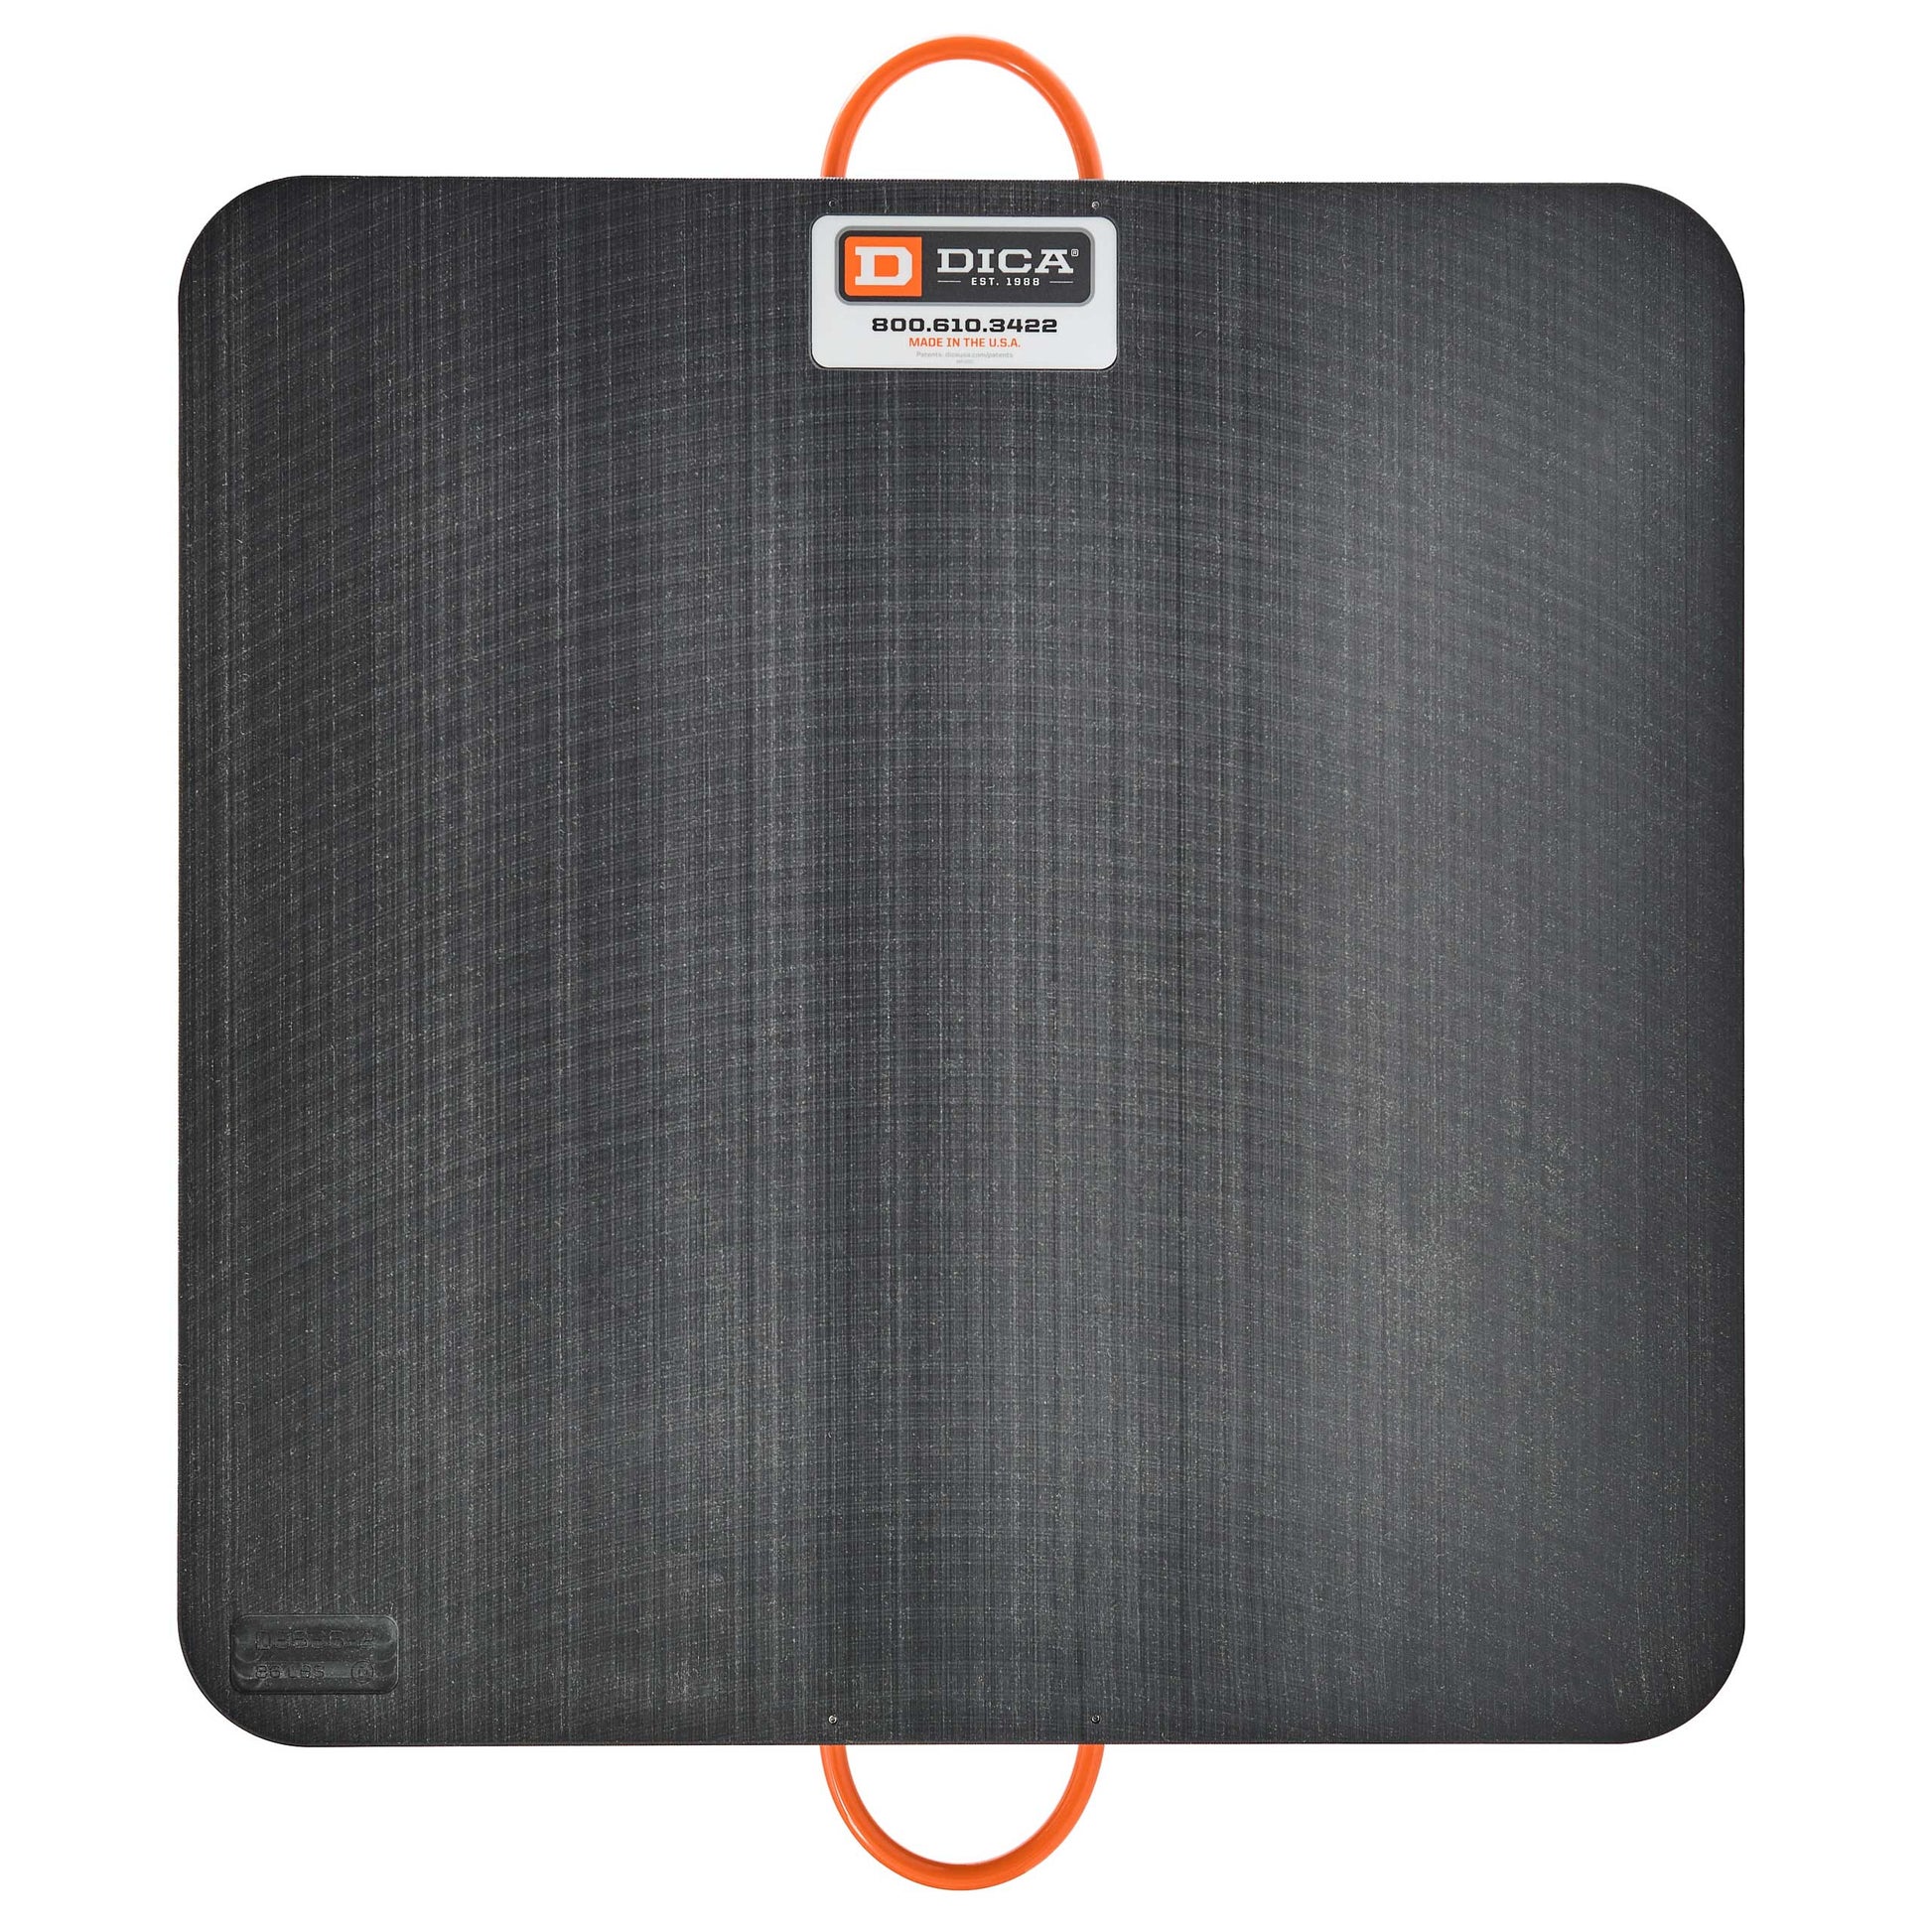 SafetyTech® 36" x 36" Outrigger Pad | Heavy Duty | 2" Thick | Black Image 1 of 3